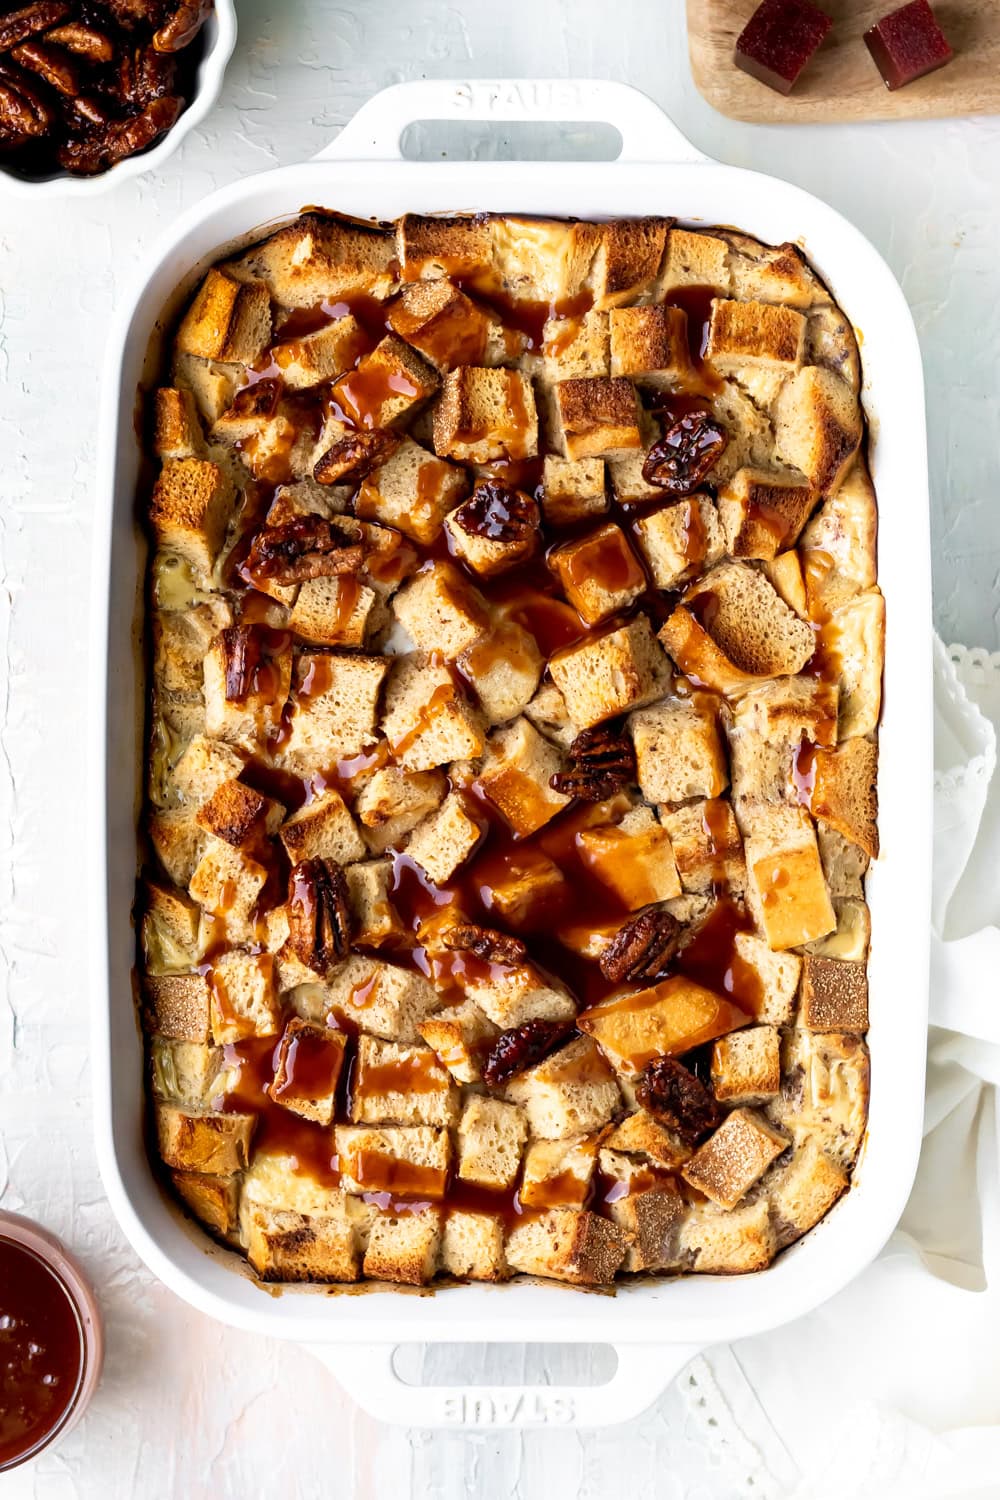 baked guava caramel bread pudding in a white baking dish